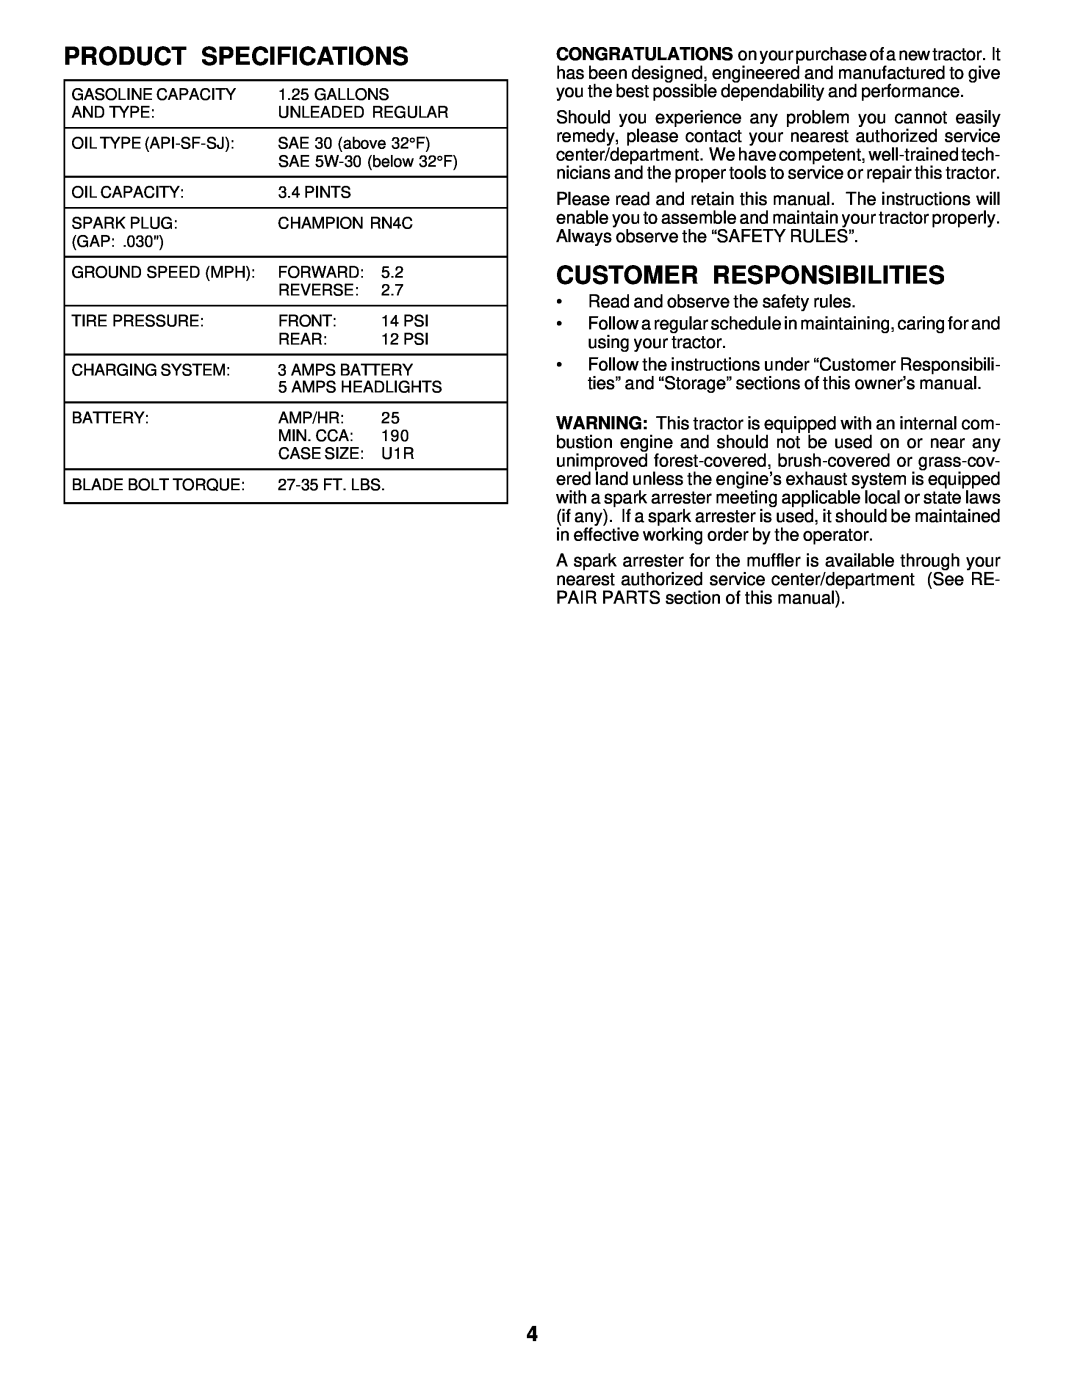 Weed Eater S165H42A owner manual Product Specifications, Customer Responsibilities 